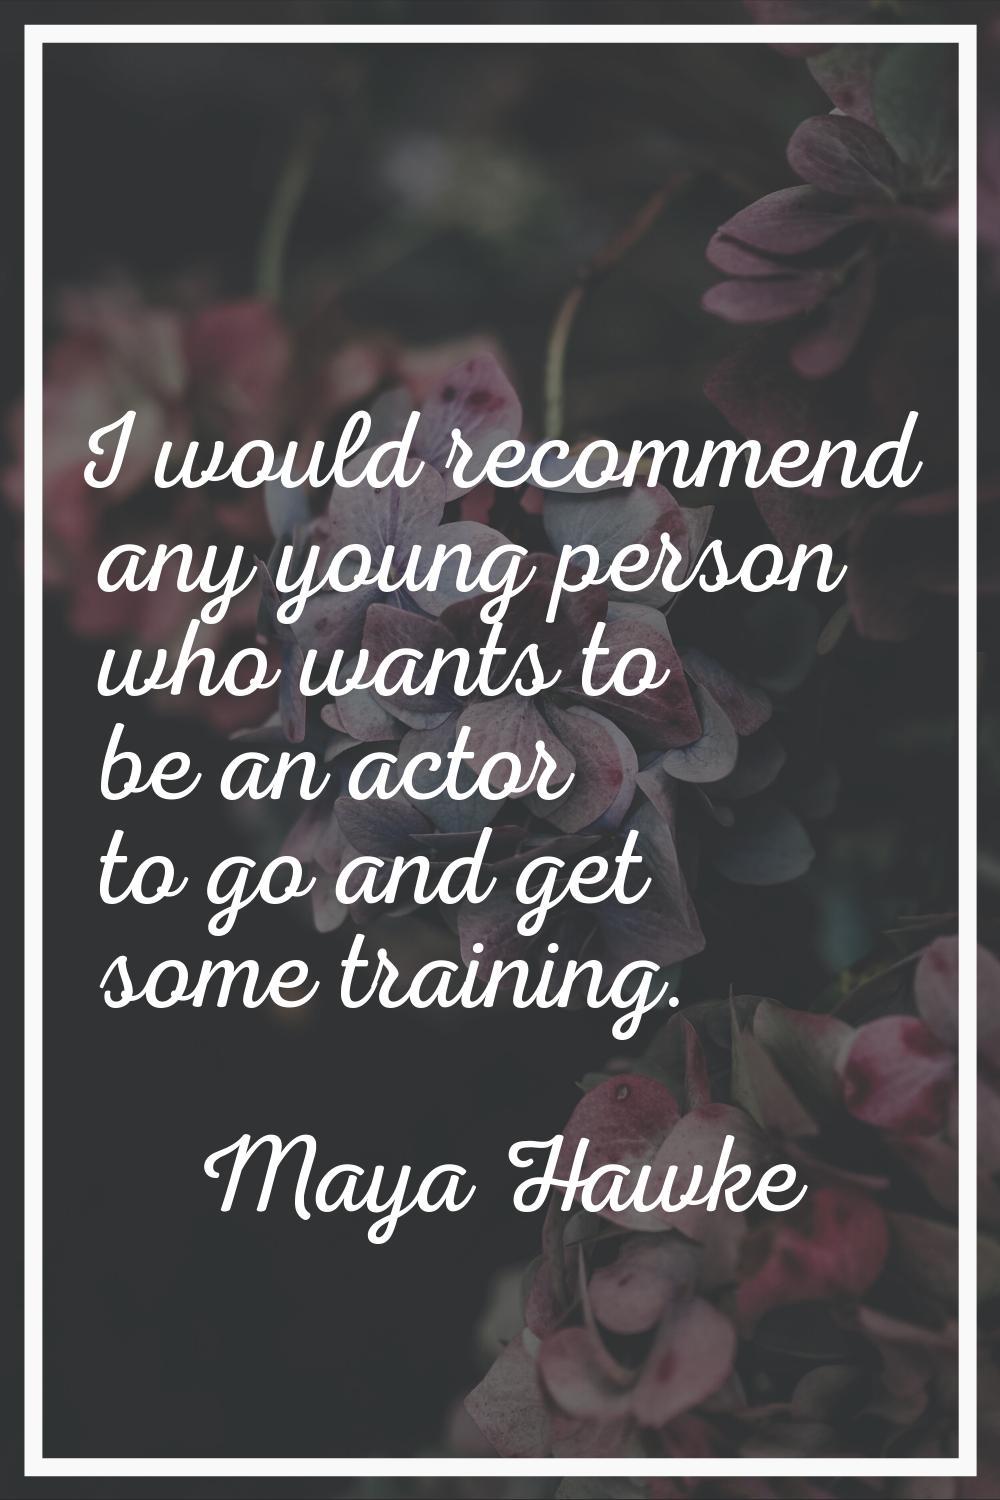 I would recommend any young person who wants to be an actor to go and get some training.